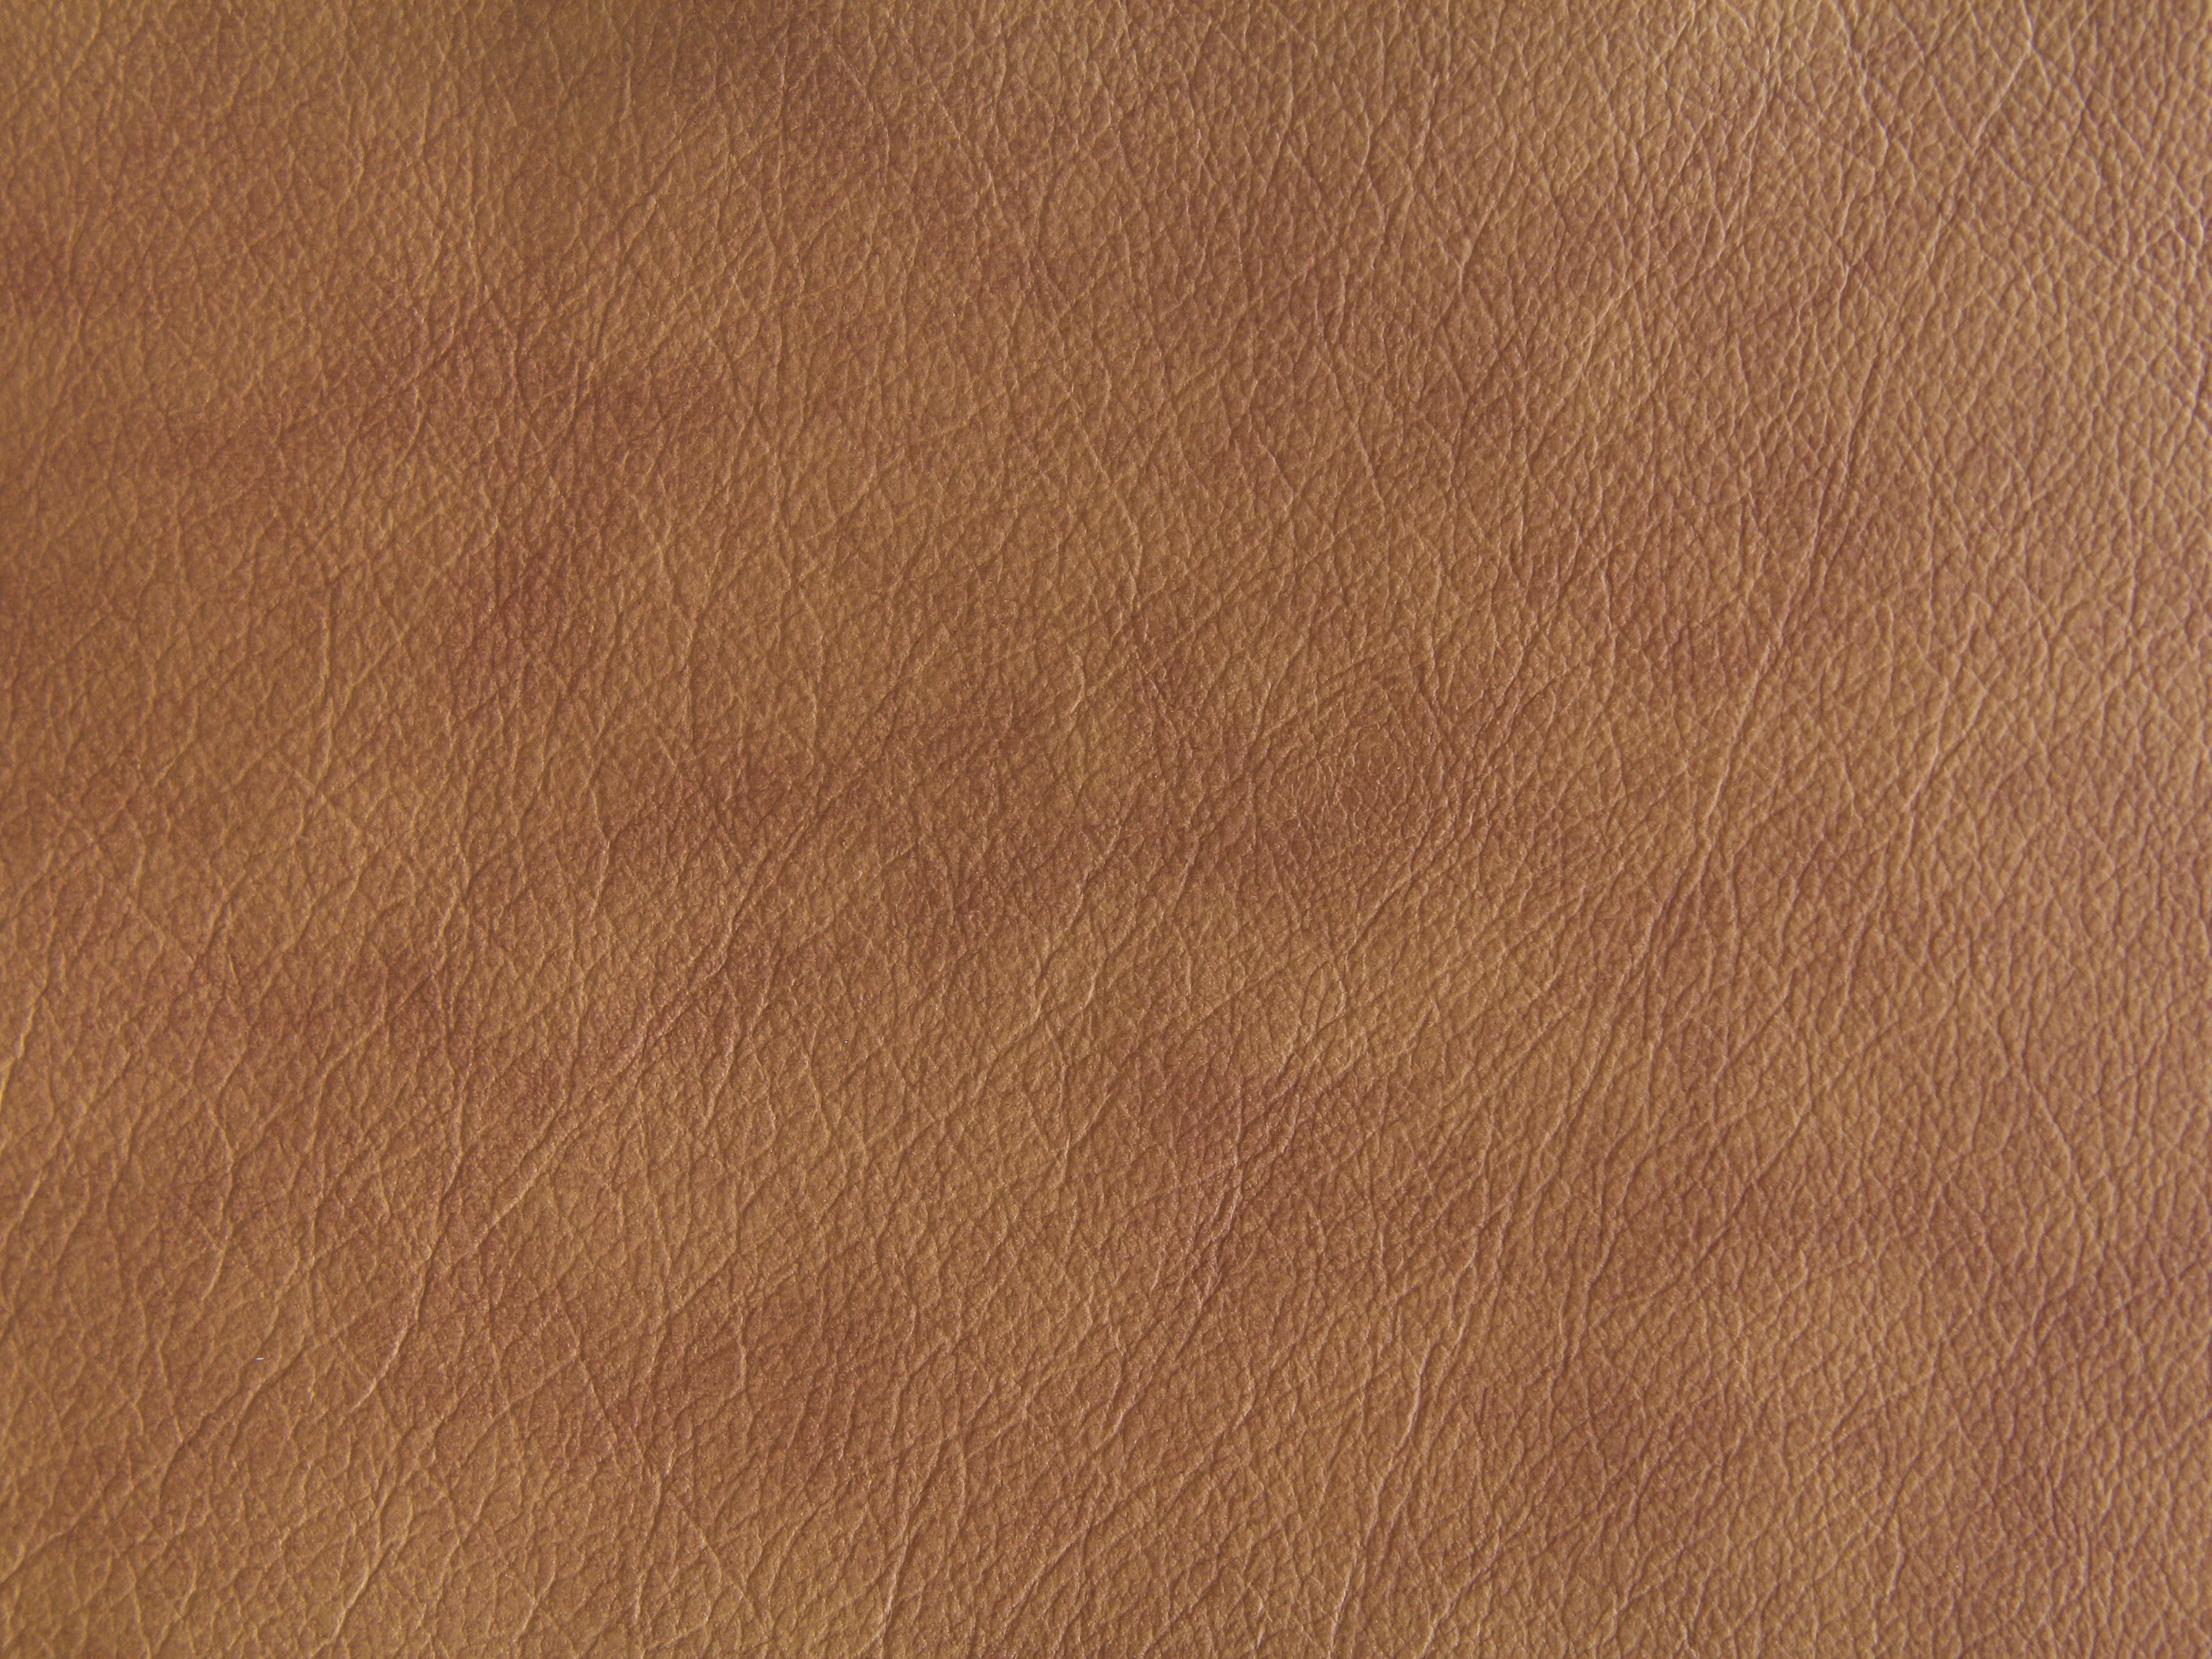 Natural Brown Leather Texture Leather Wallpaper Brown Genuine Leather  Background Stock Photo  Download Image Now  iStock